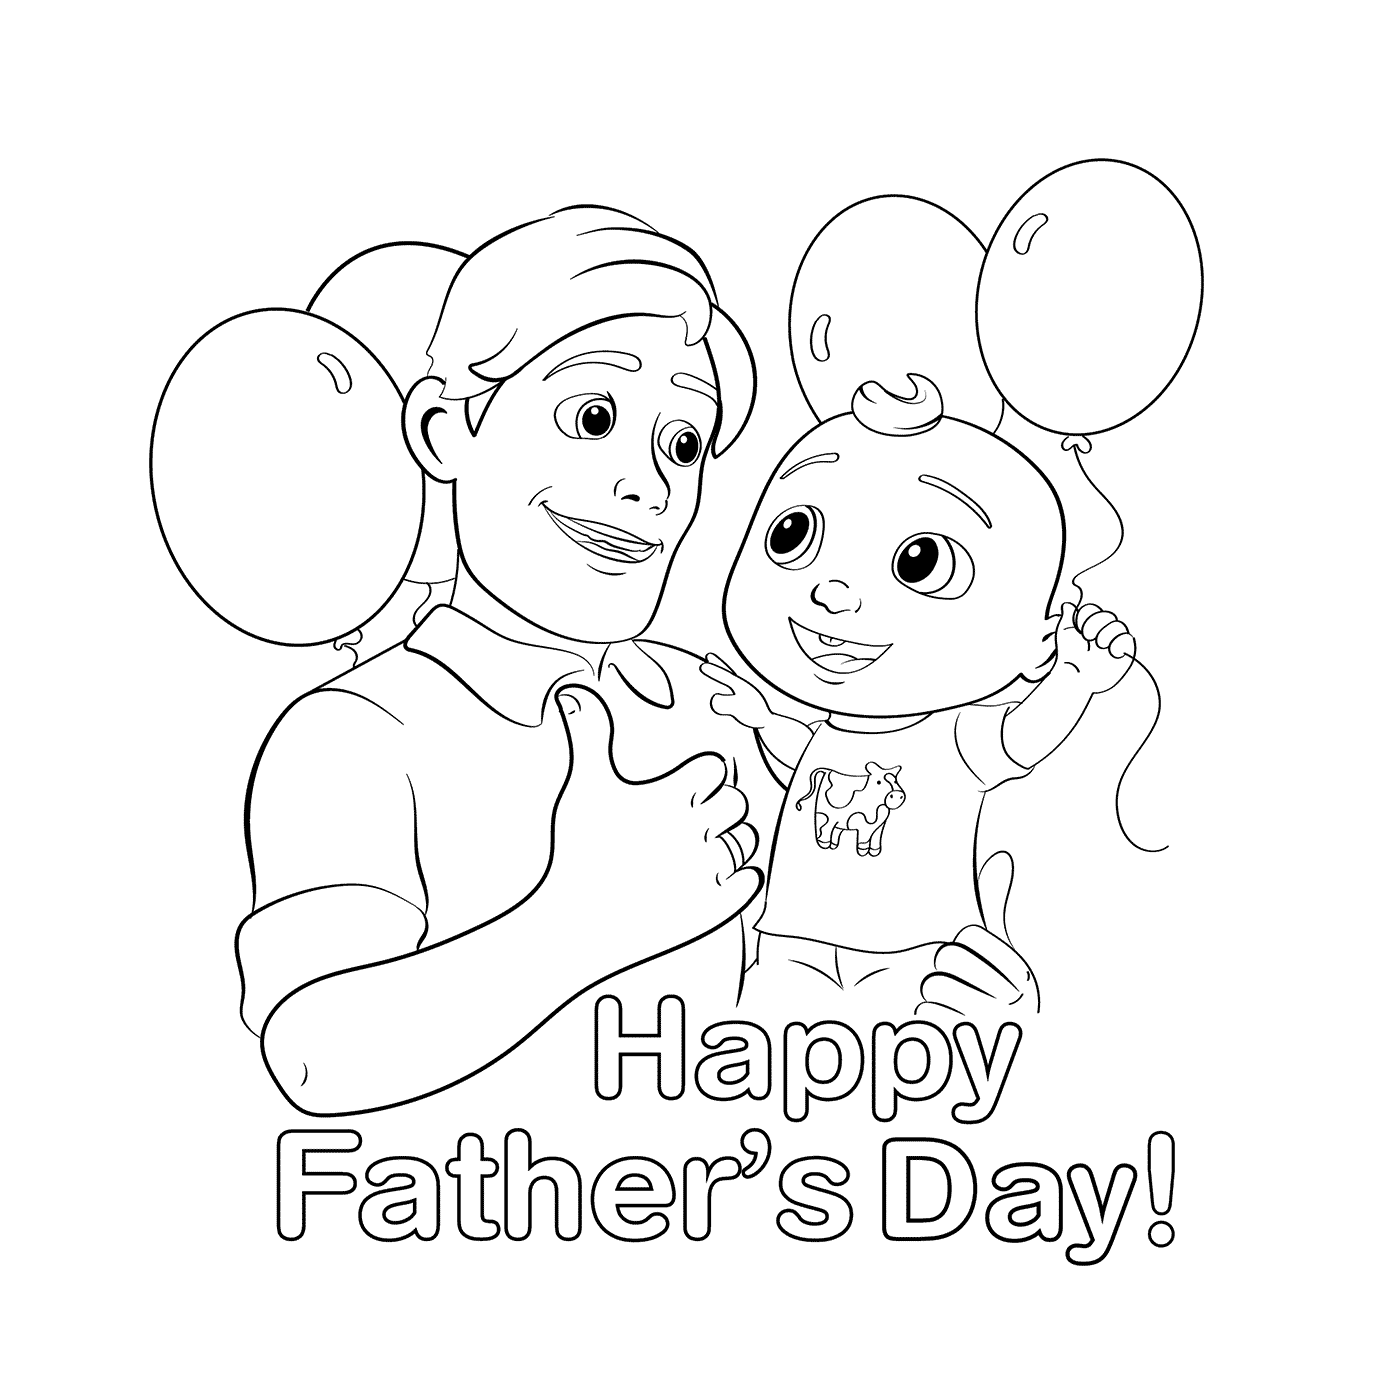  Celebrating Father's Day with a child 